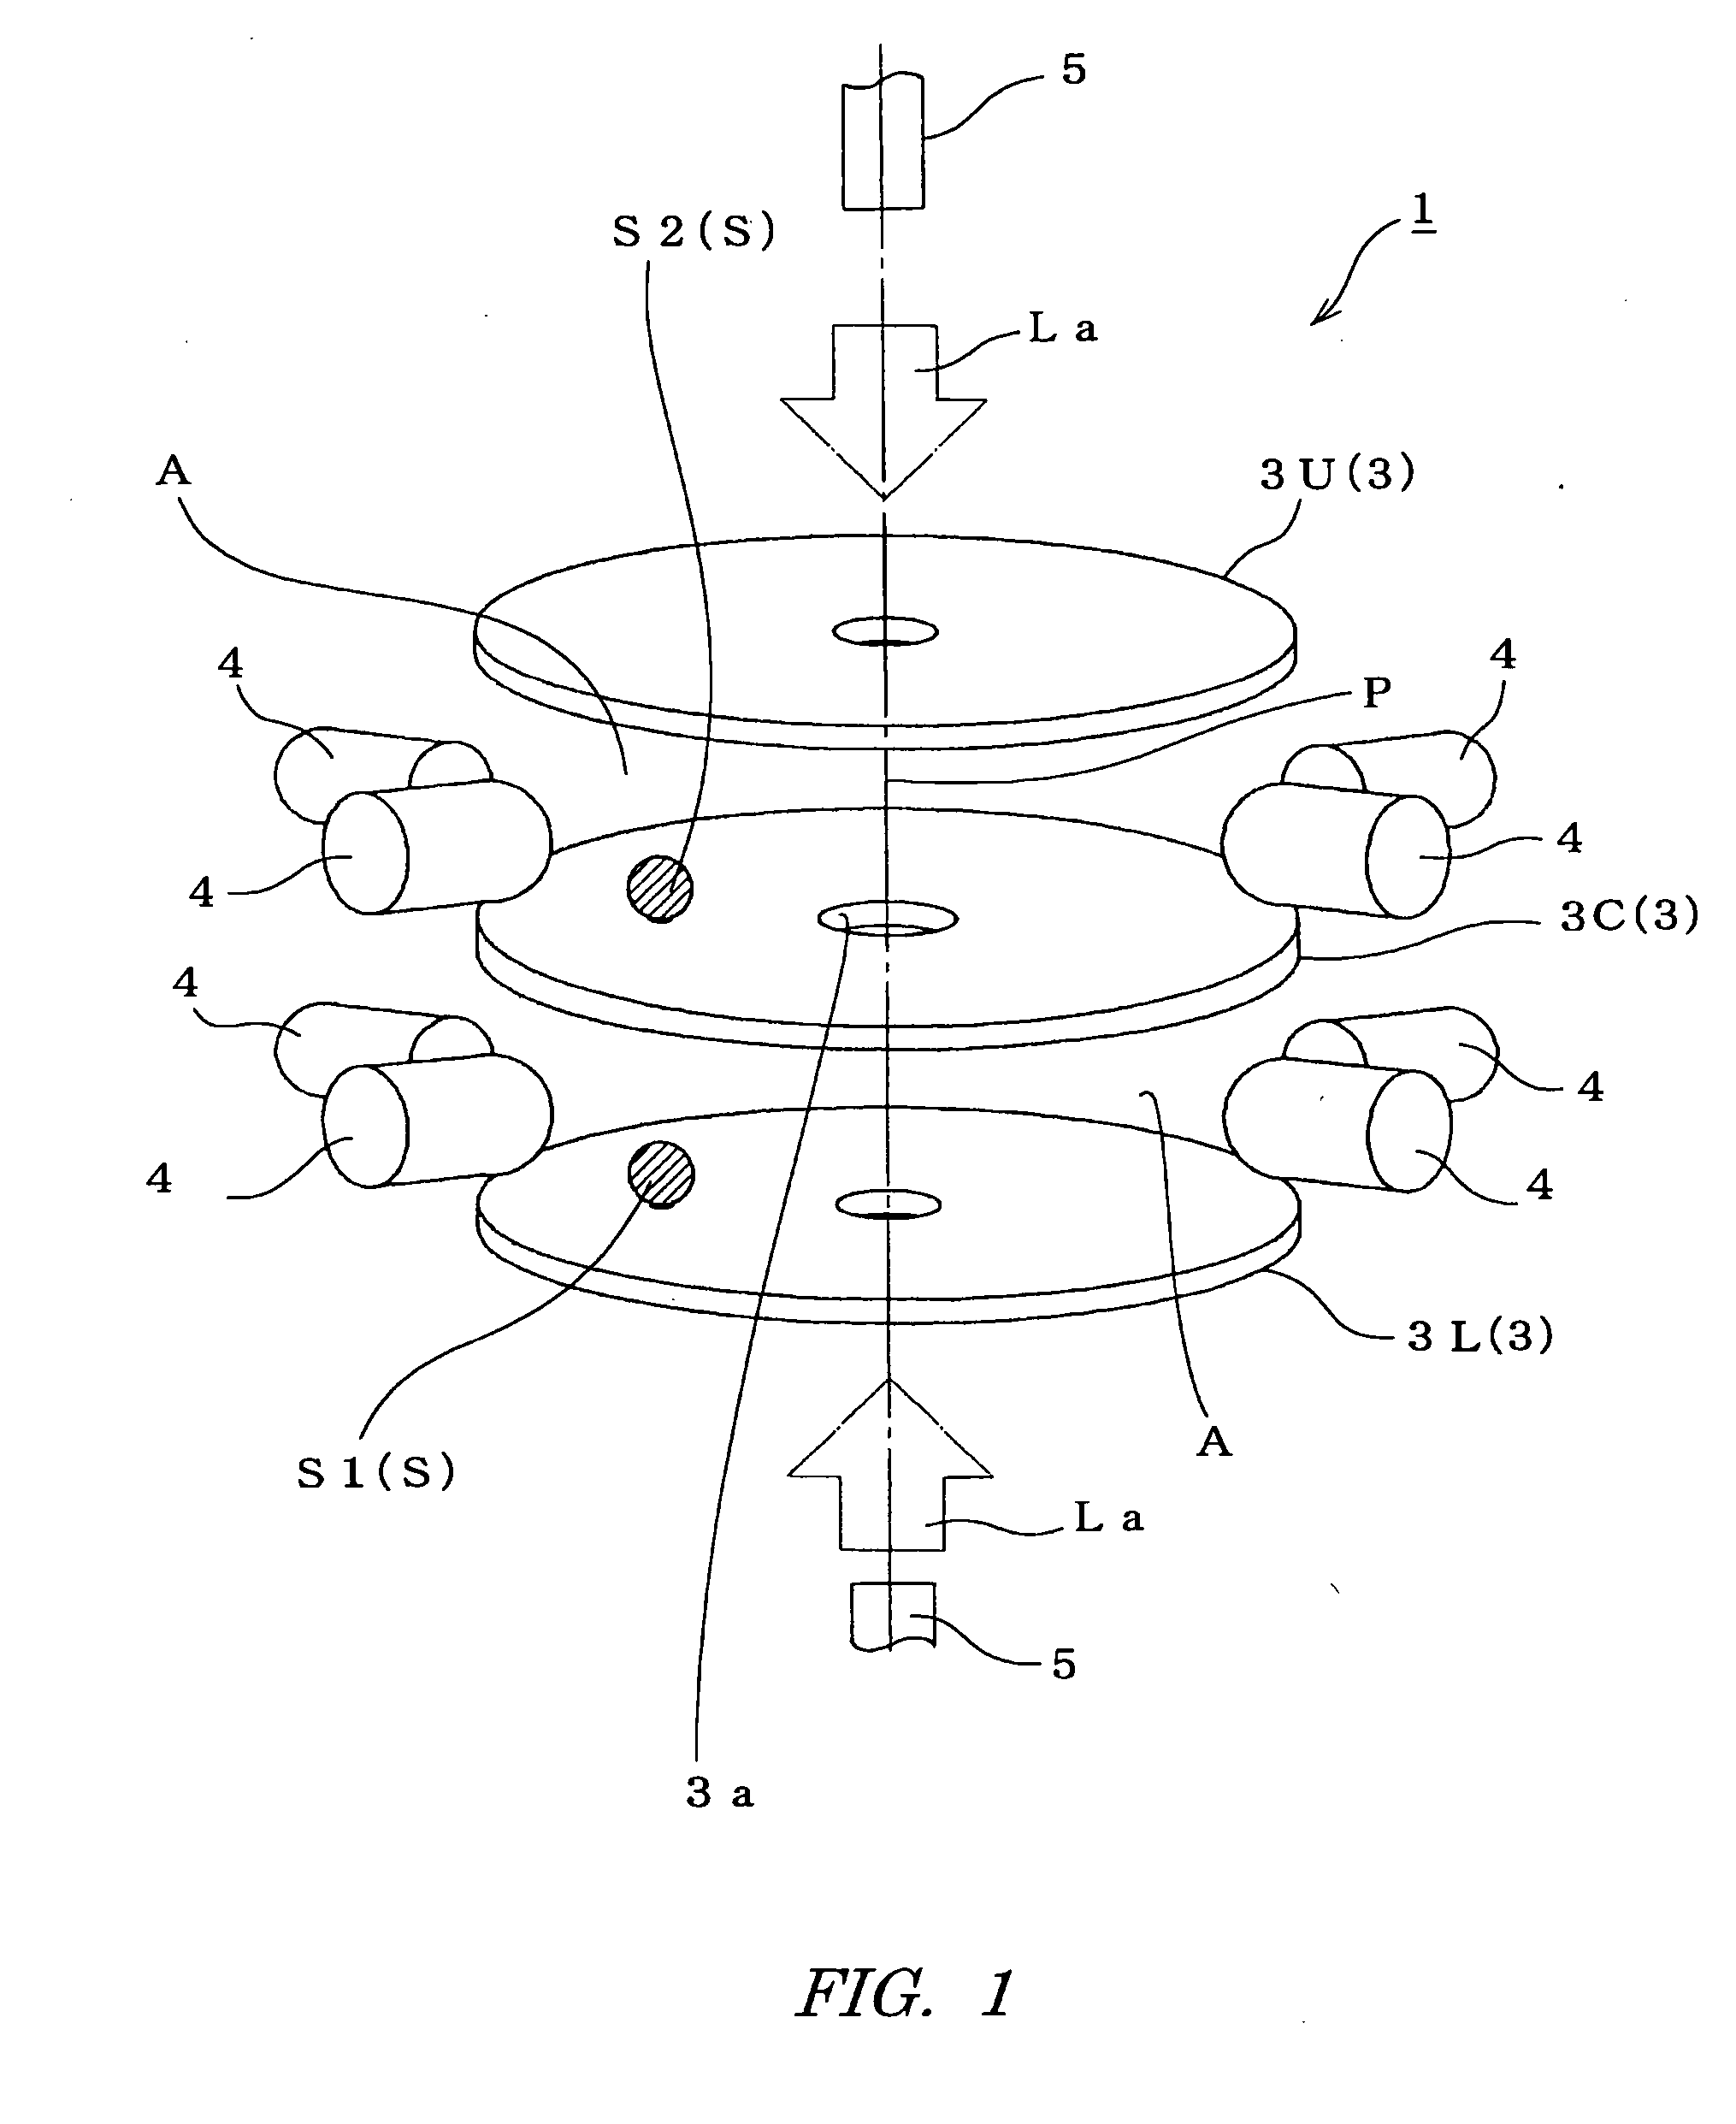 Electrostatic suspension furnace and method for fusing samples using this